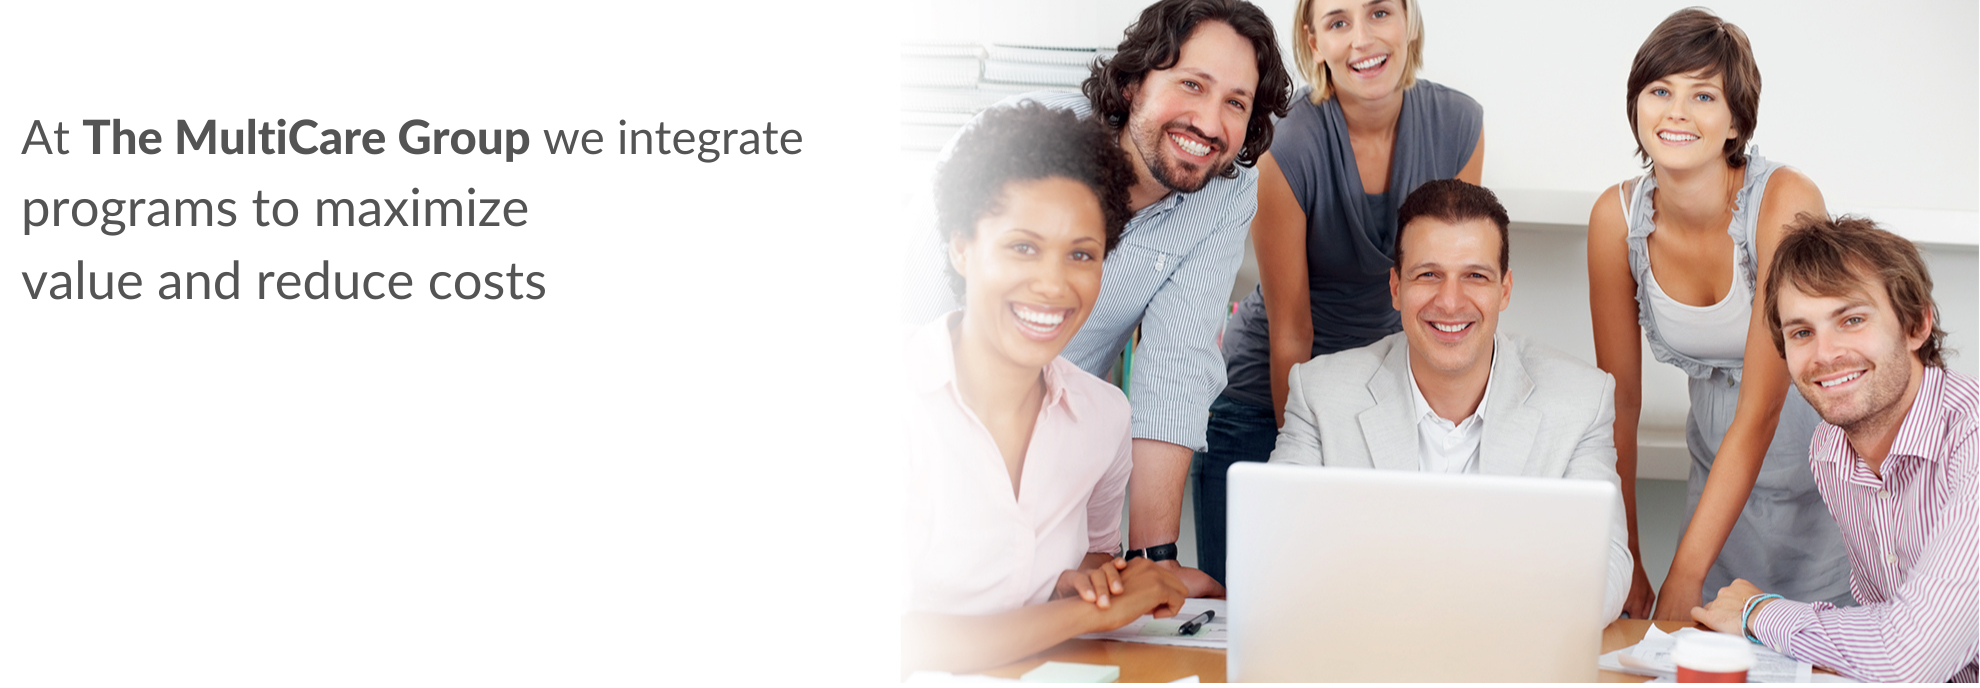 The MultiCaregroup website banner - Integrate